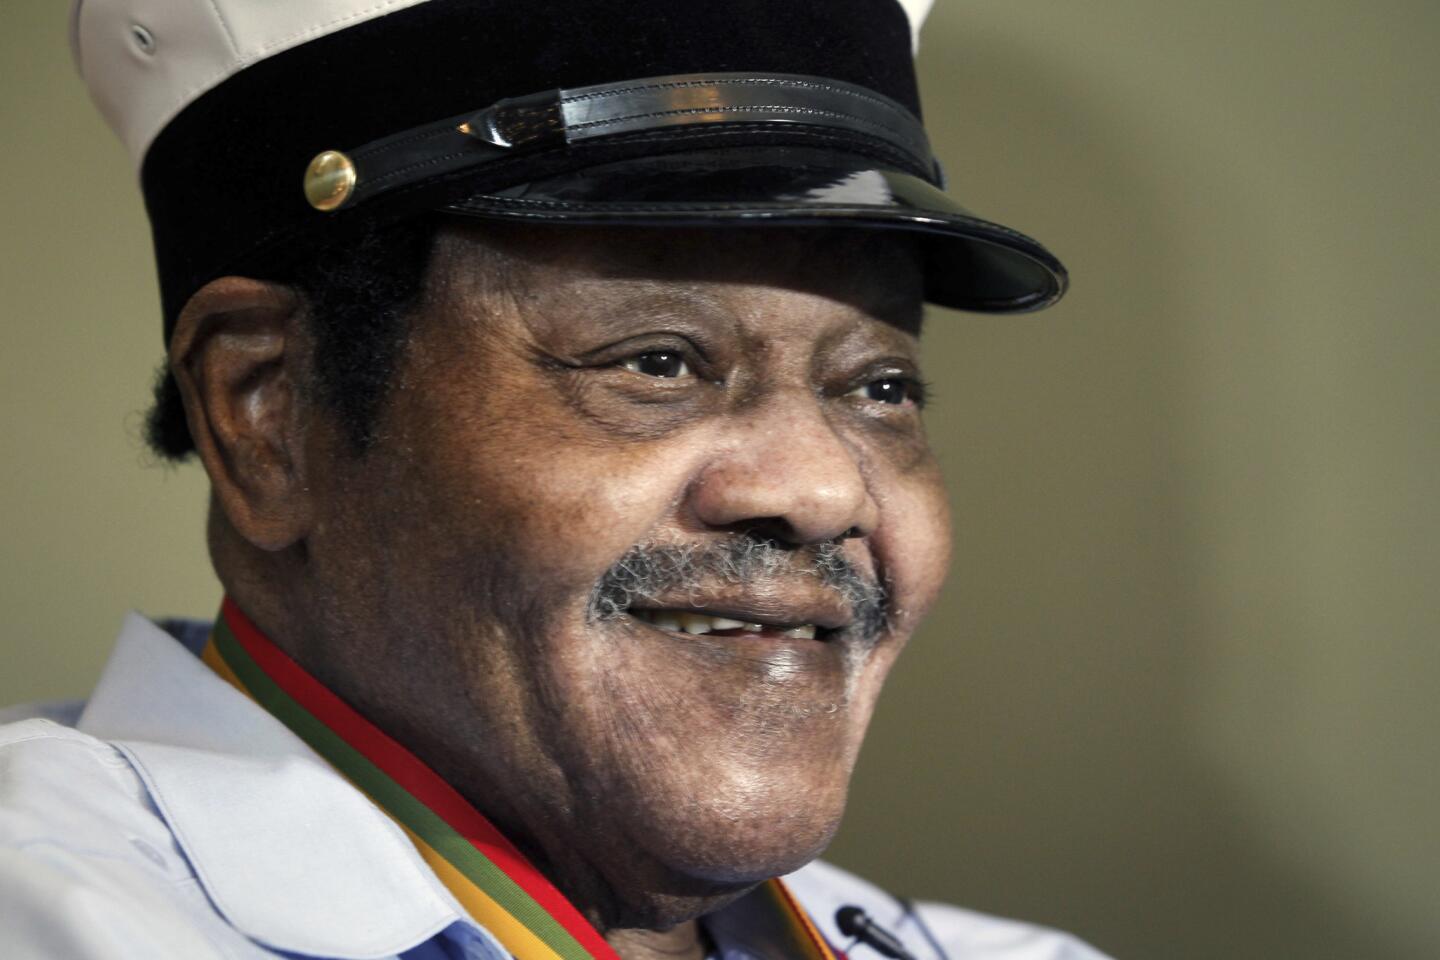 Rock 'n' roll pioneer Fats Domino, whose steady, pounding piano and easy baritone helped change popular music, died Oct. 24, 2017, in Harvey, La. He was 89. Read more.